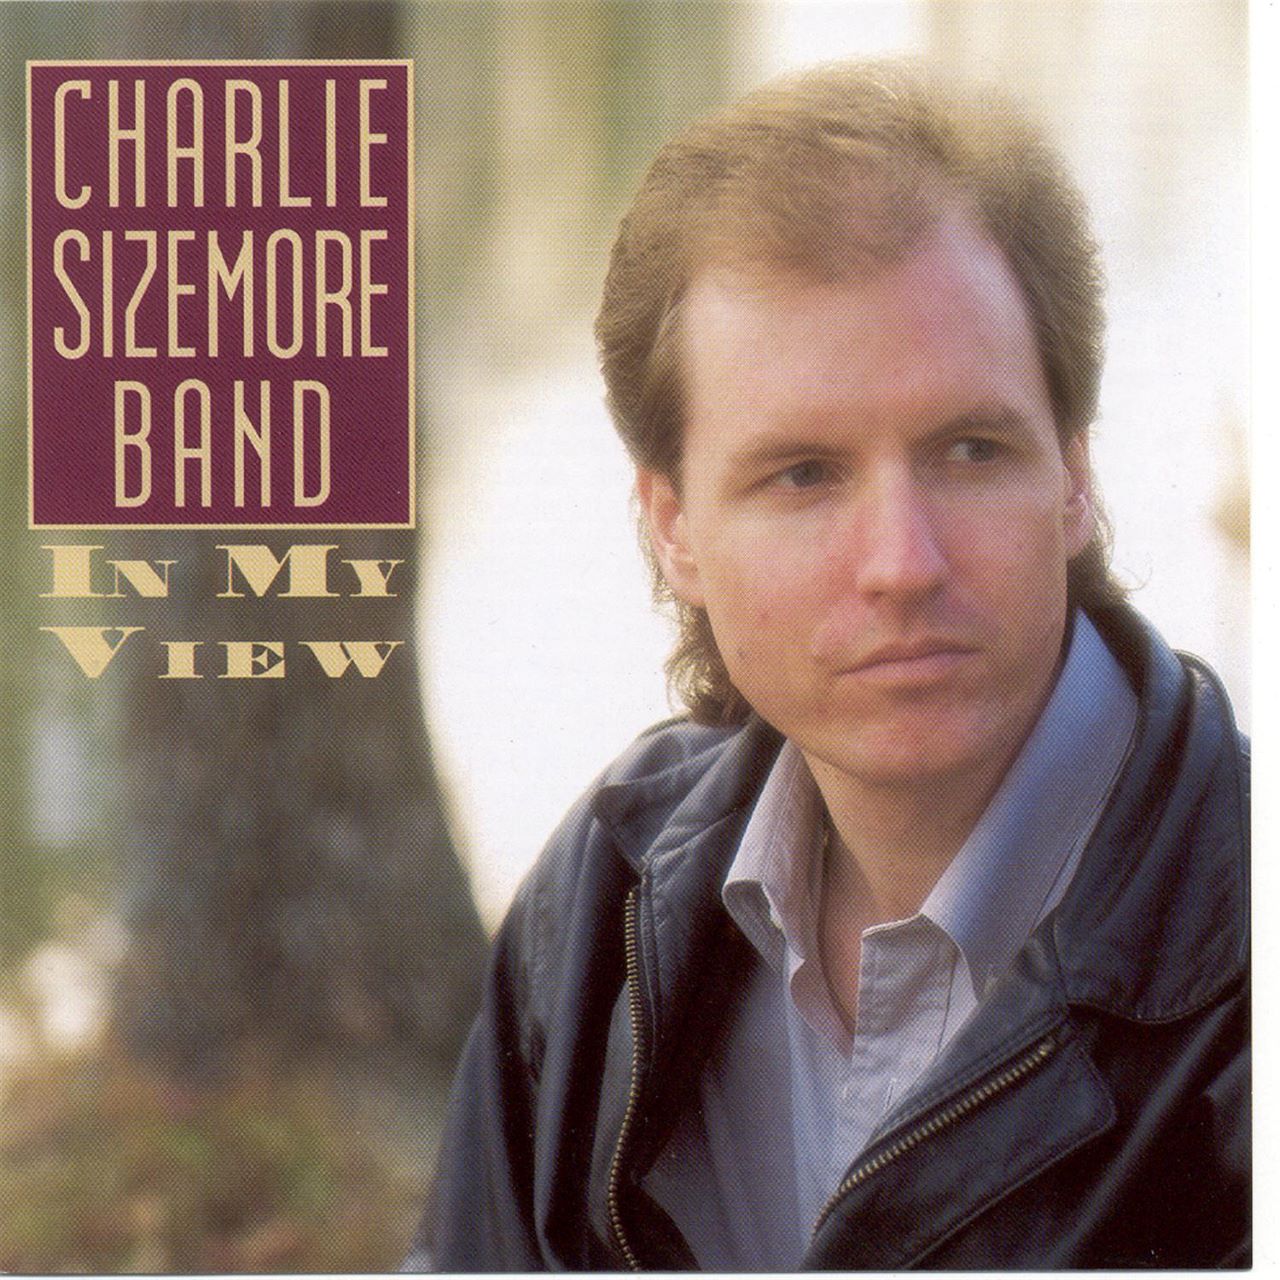 Charlie Sizemore Band - In My View cover album